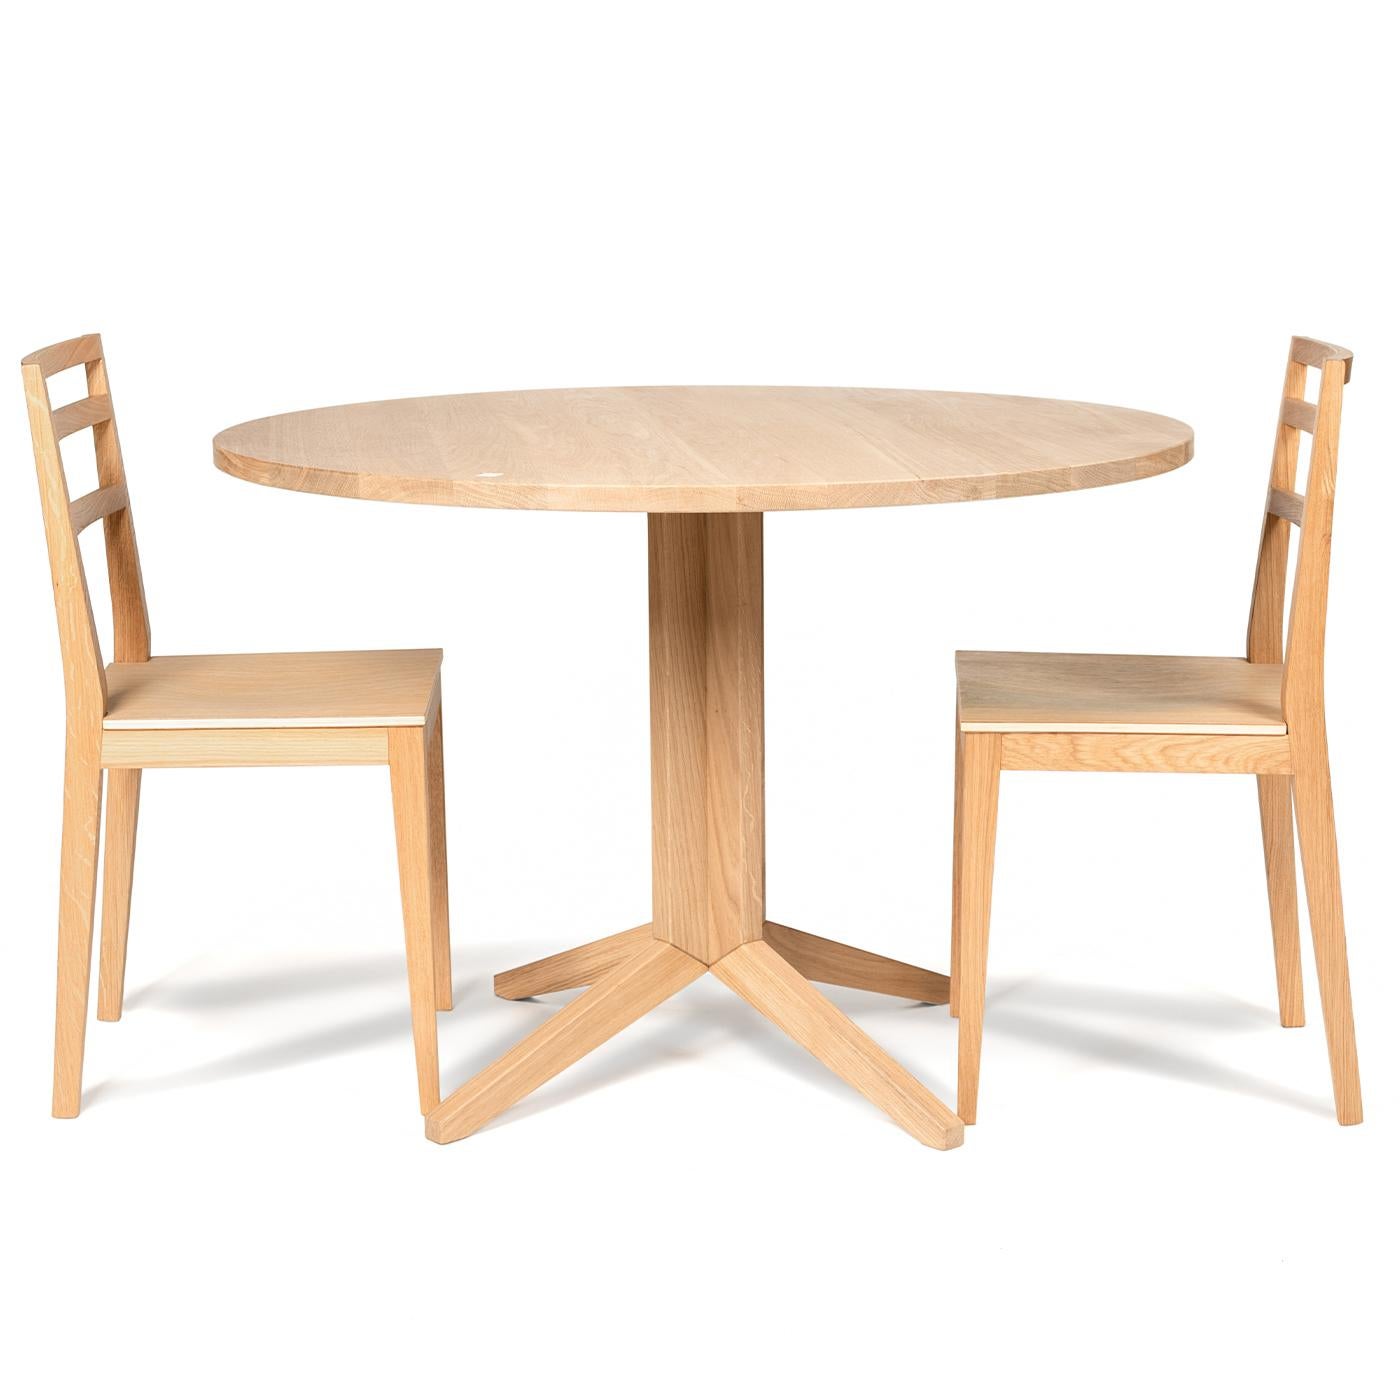 This elegant, simple round table is a wonderful addition to any dining or office space with a modern touch. The structure of the table, including the column and four legs, is in solid oak while the tabletop is in wood laminate, all coated in a